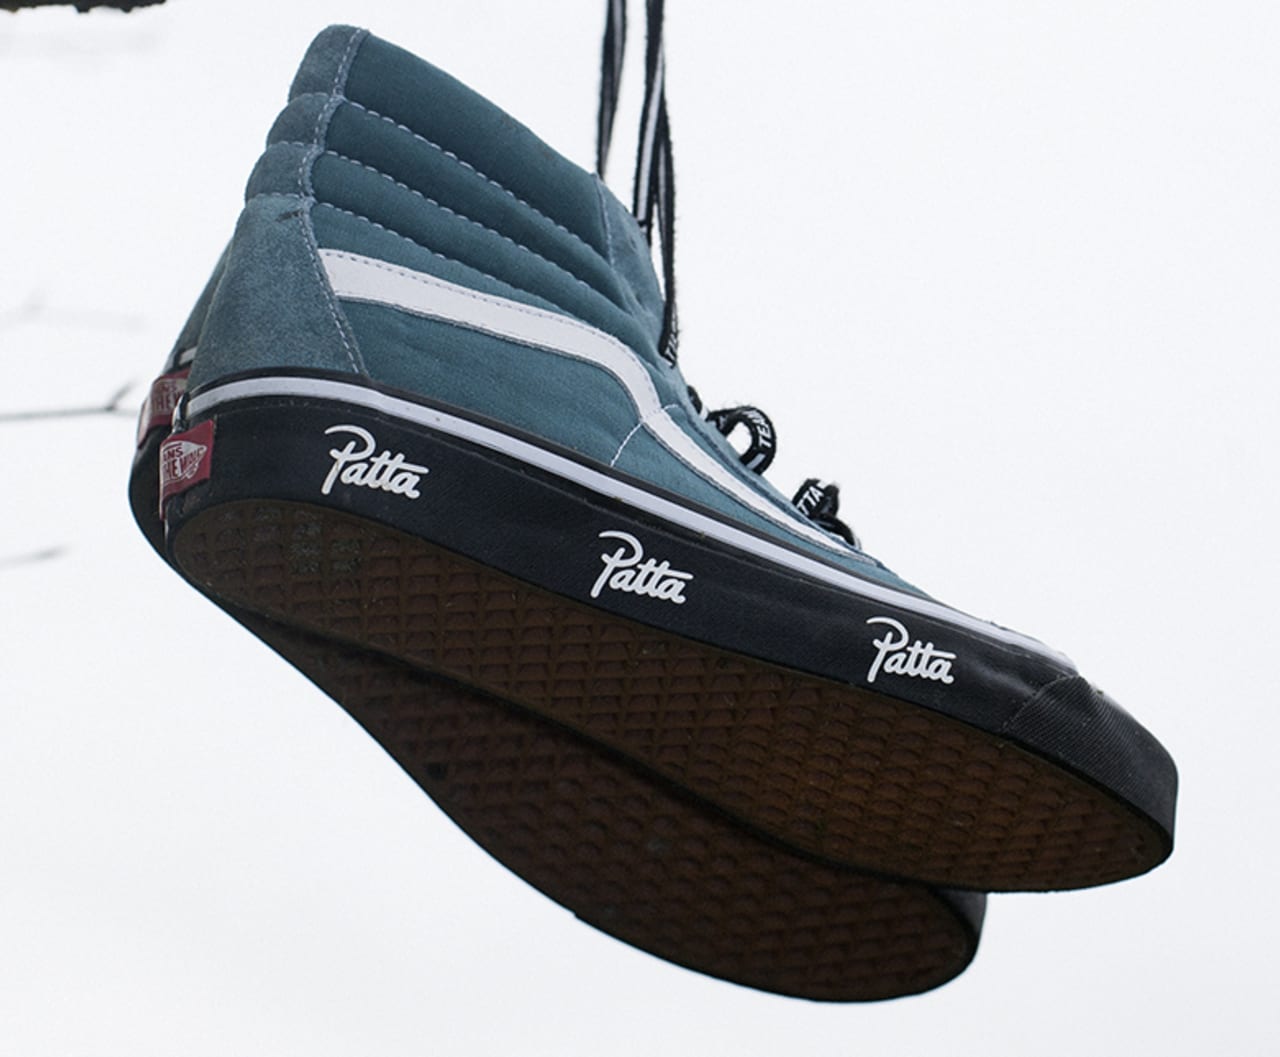 Patta x Vans Sk8-Hi Collection Release Date | Sole Collector